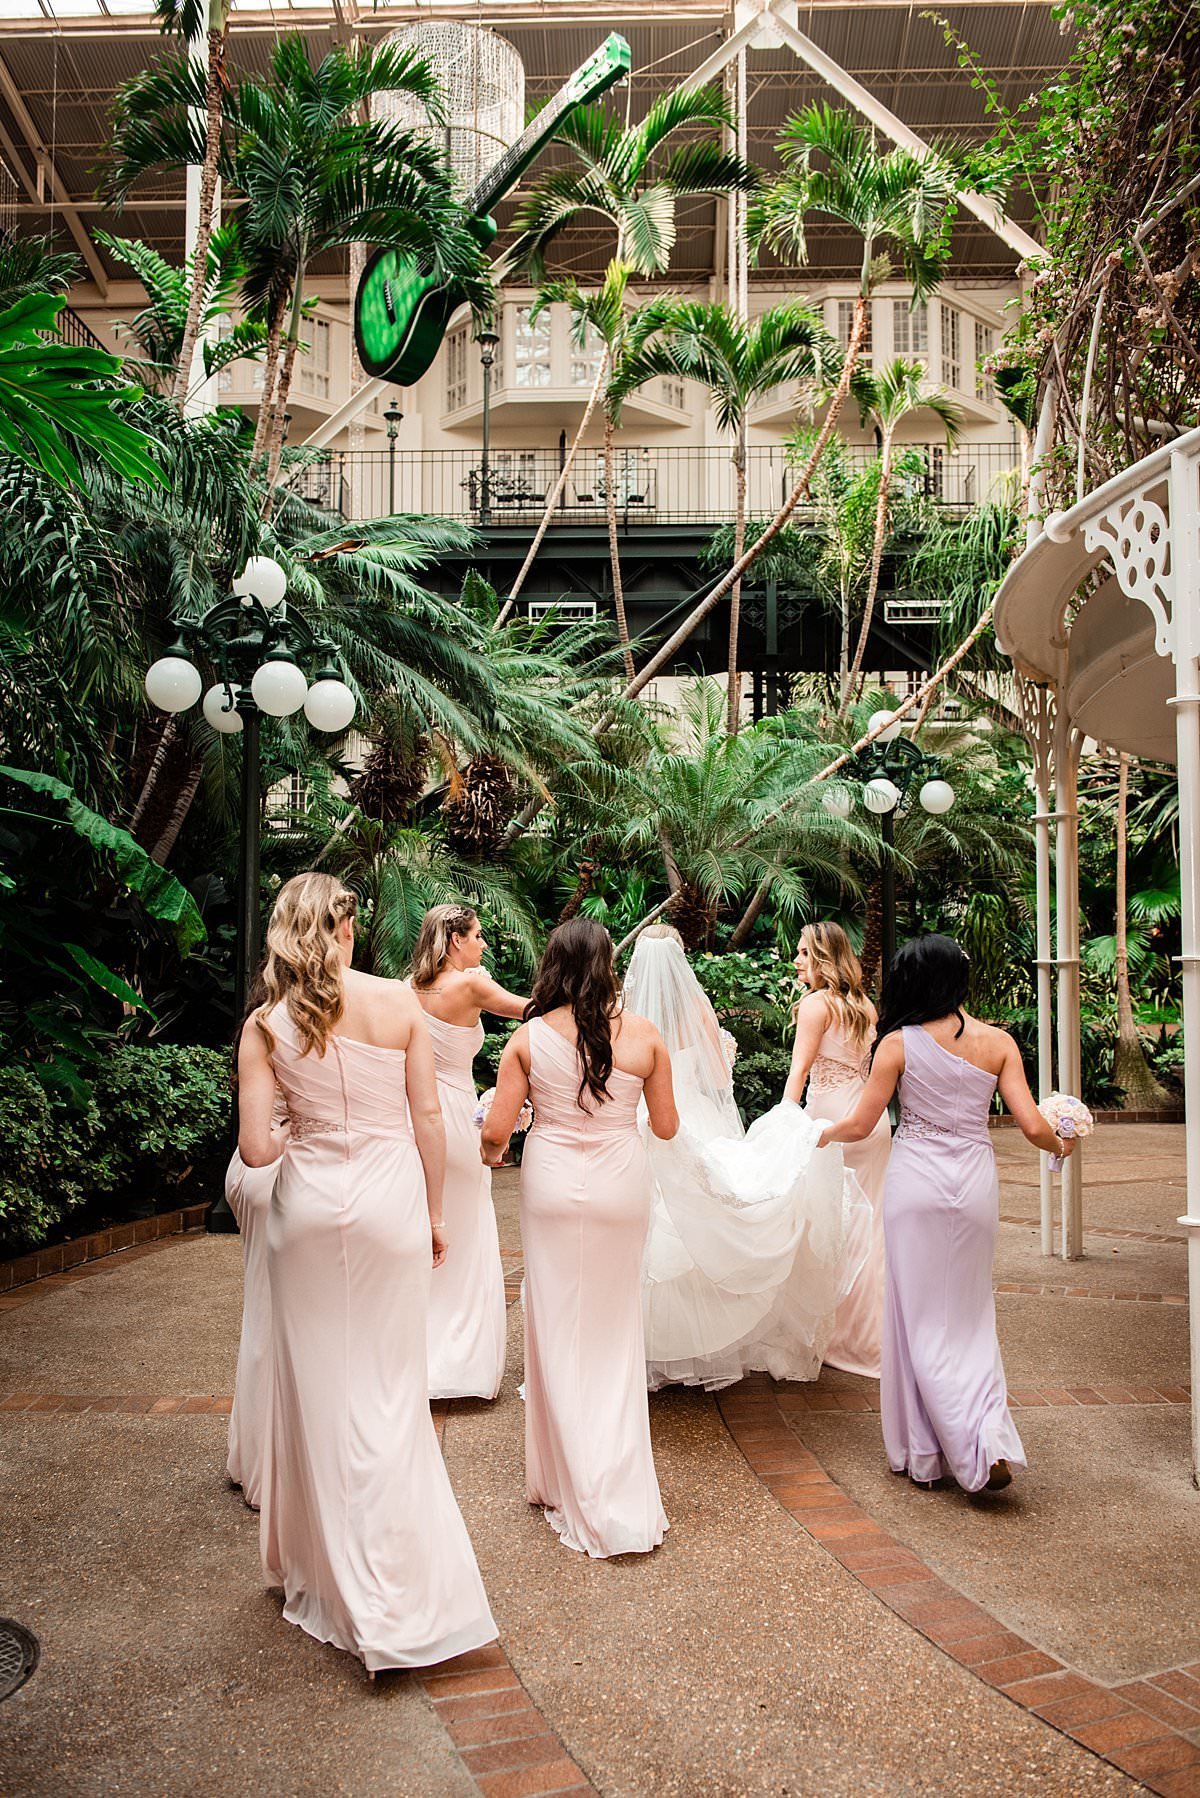 Bridesmaids helping carry brides train through the tropical plants inside of Gaylord Opryland